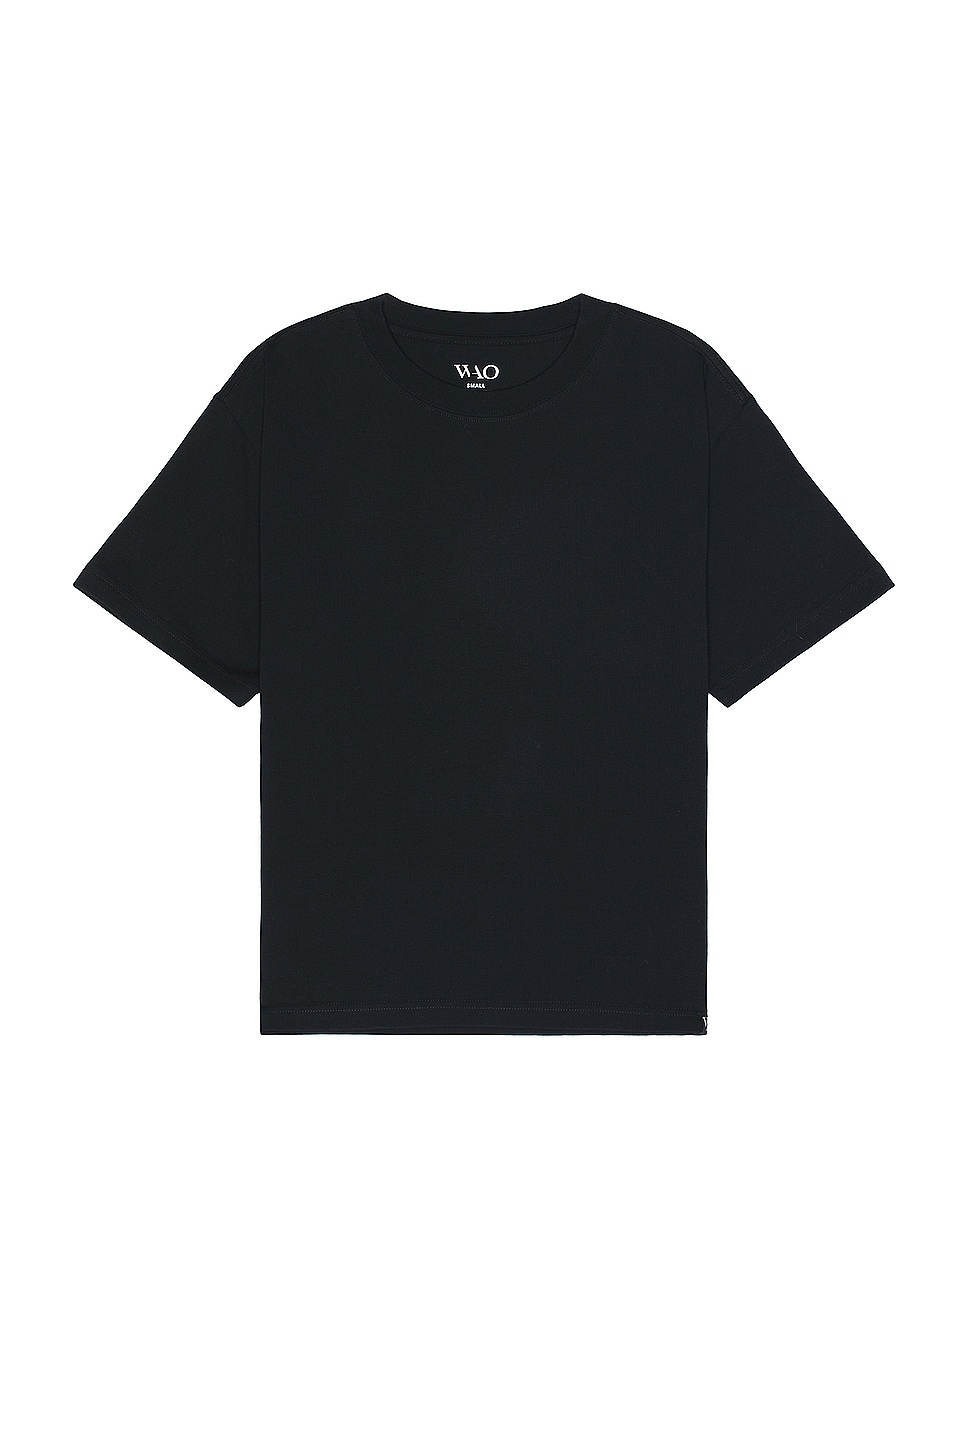 Image 1 of WAO The Relaxed Tee in Black